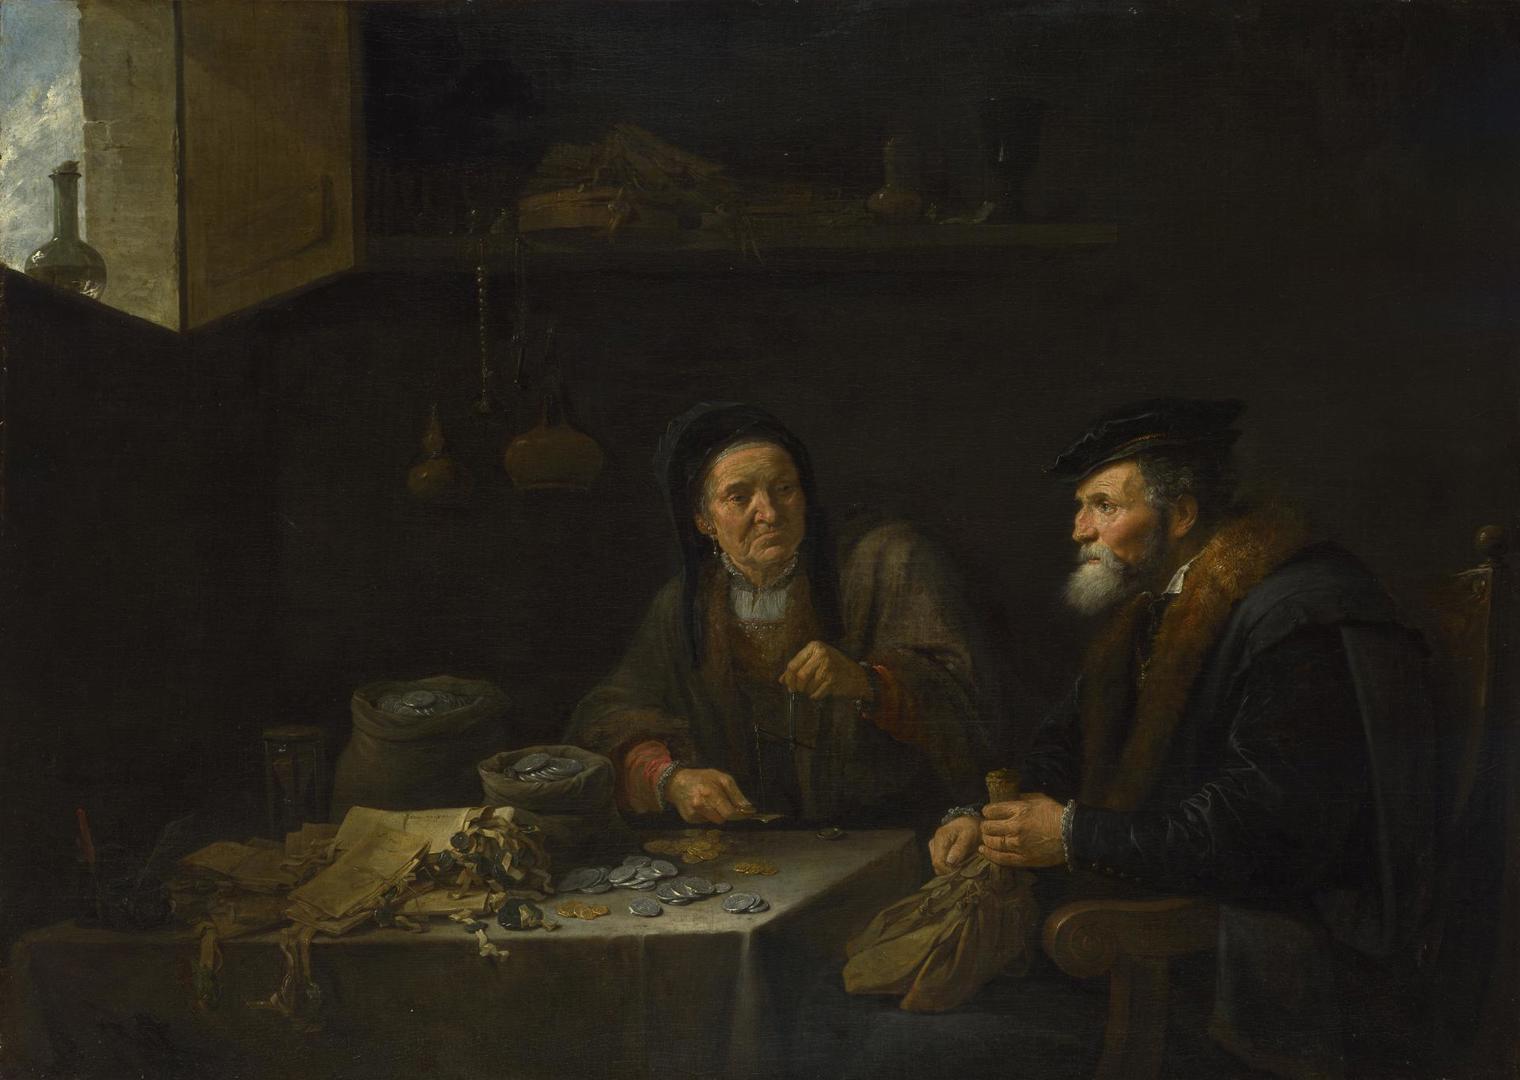 The Covetous Man by David Teniers the Younger